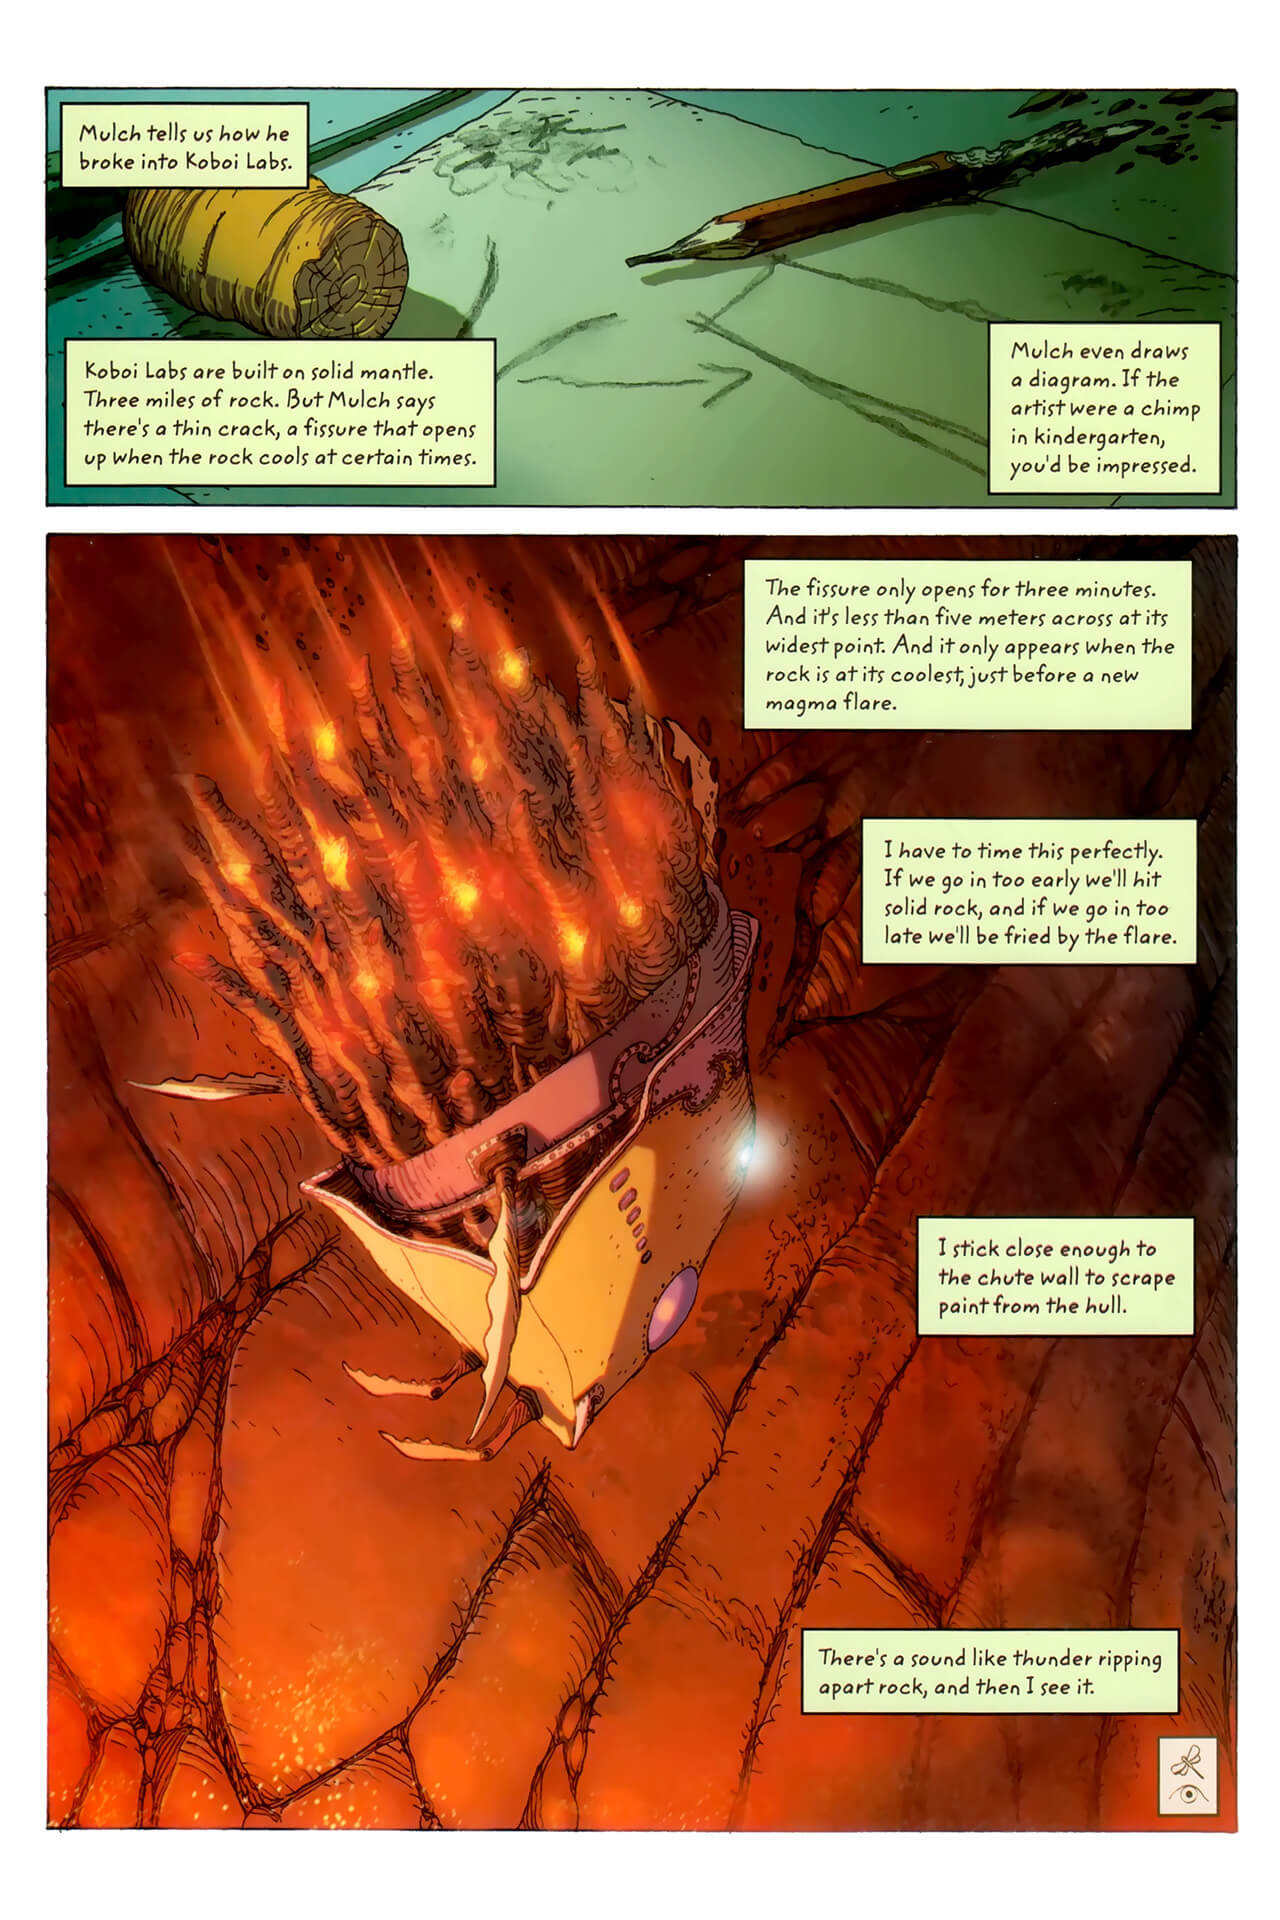 page 94 of artemis fowl the arctic incident graphic novel